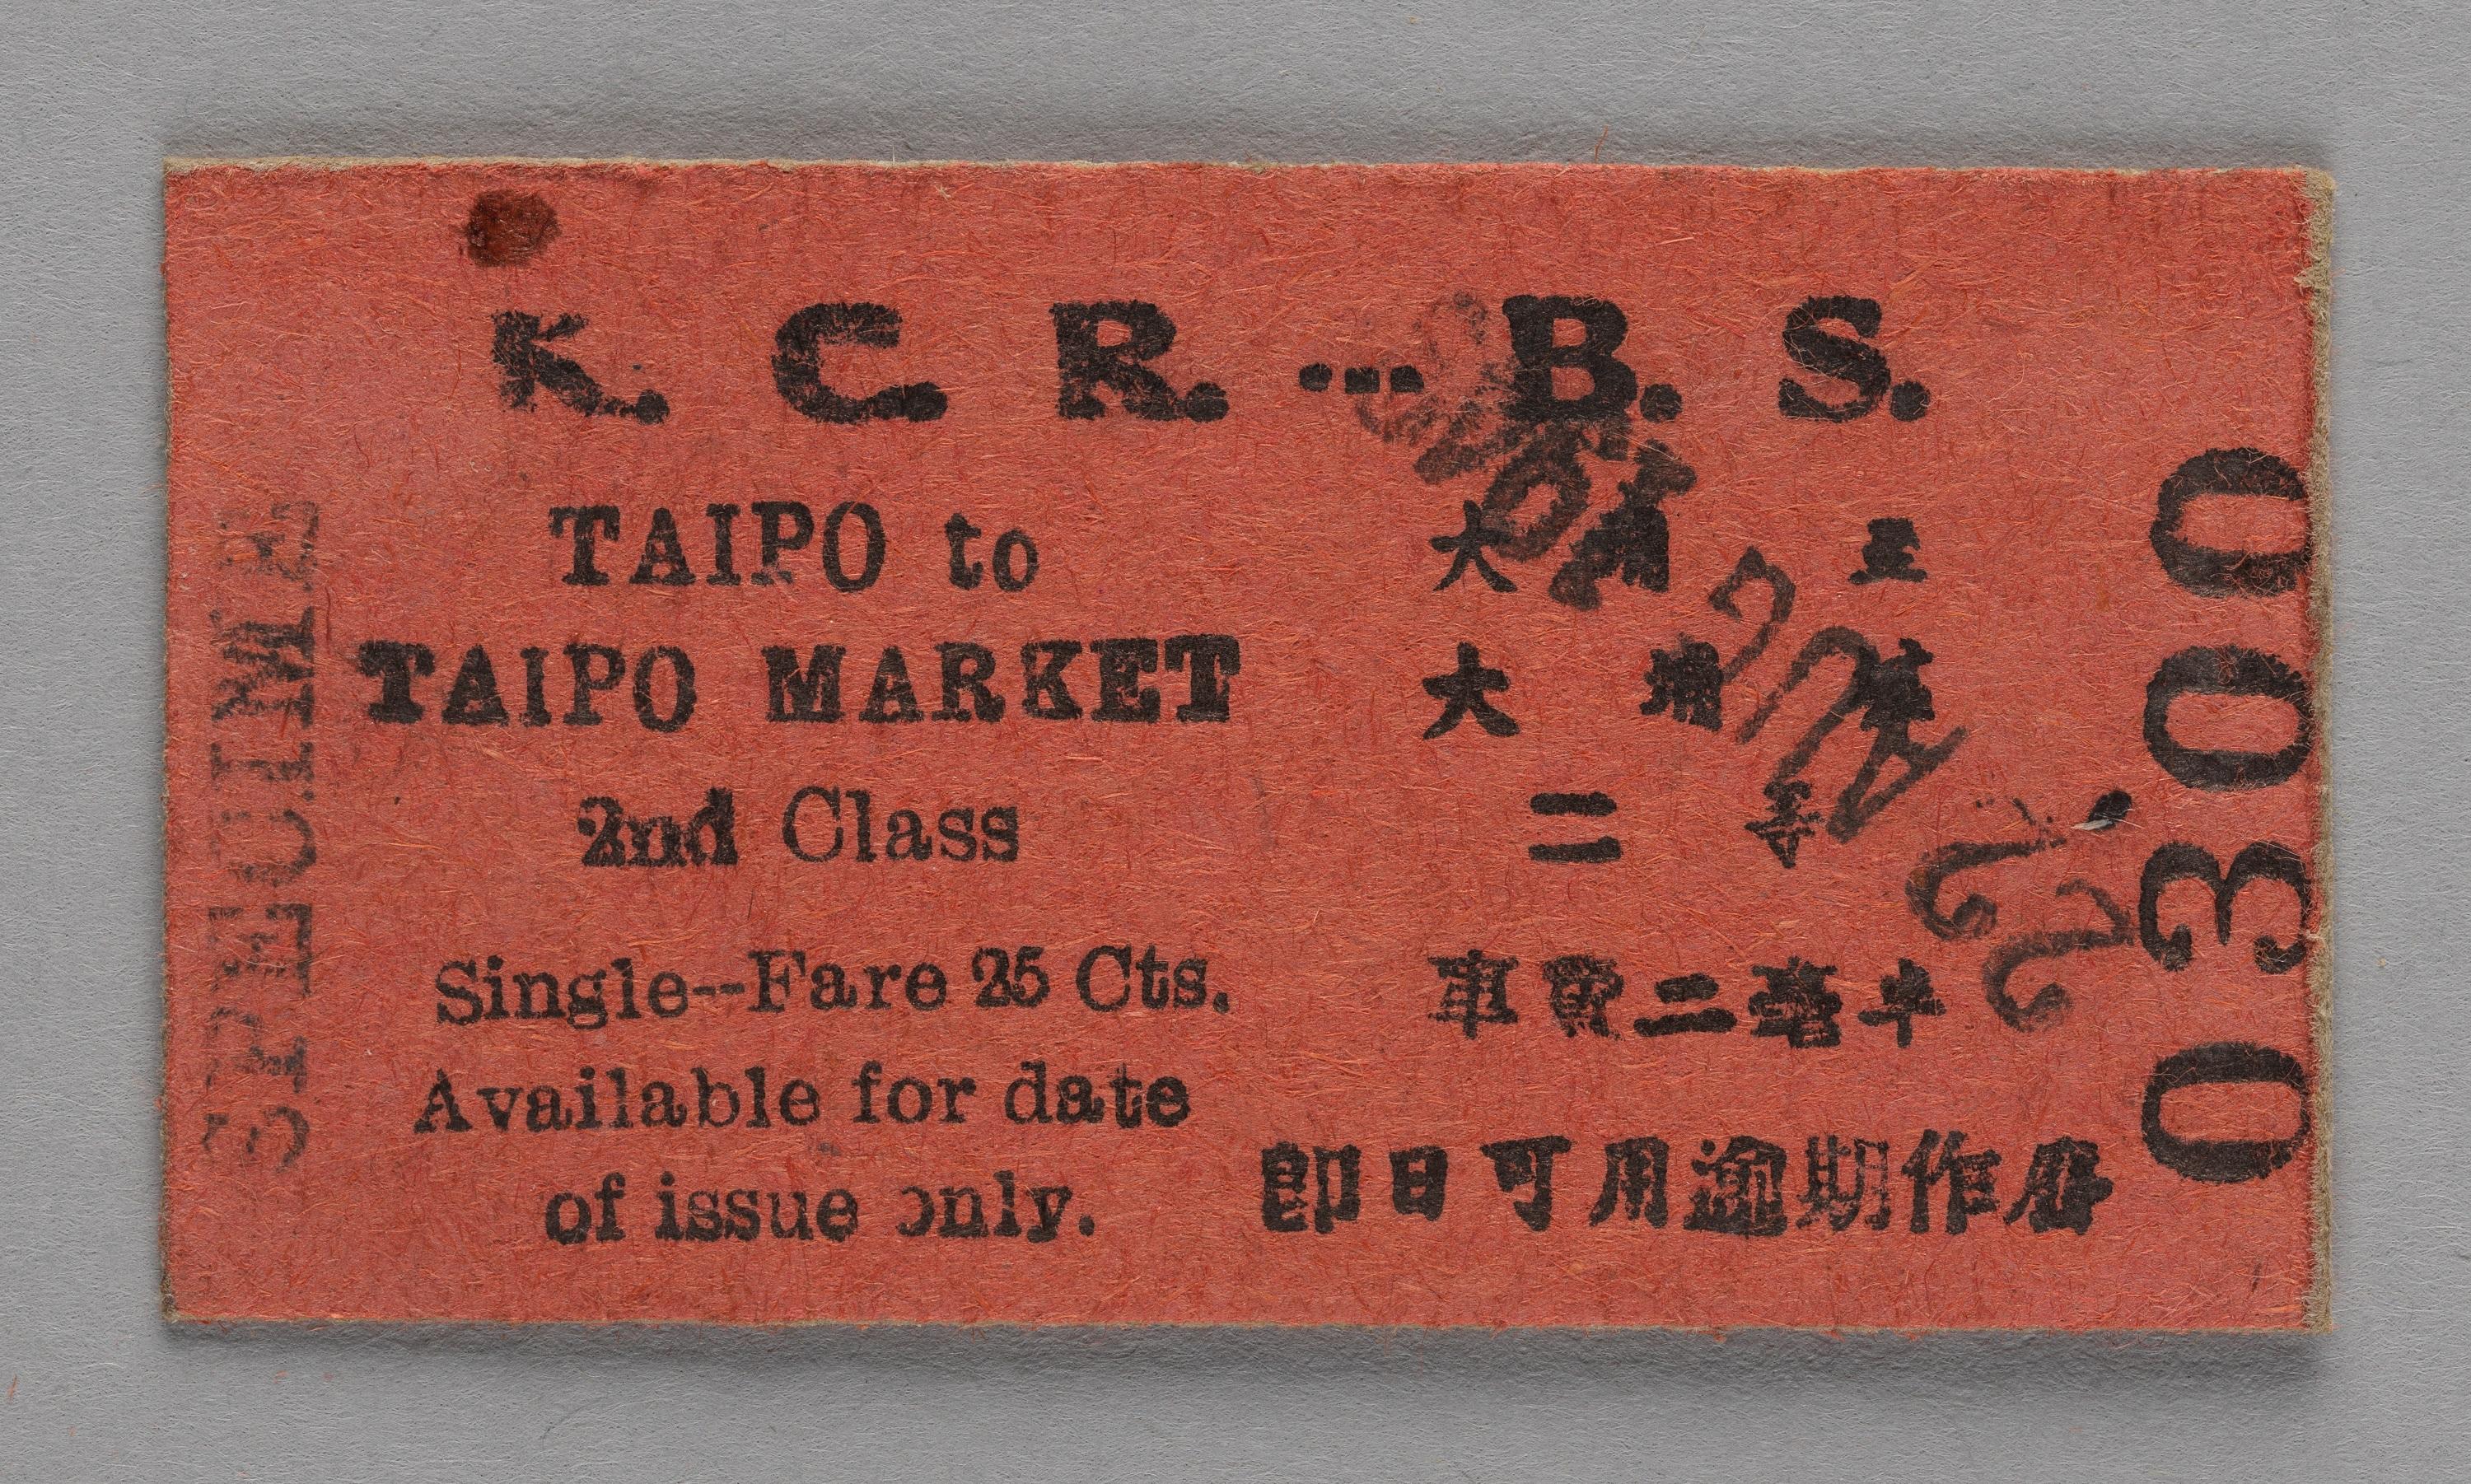 The "Stories Behind Built Heritage: Old Tai Po Market Railway Station Celebrates 110 Years" exhibition is now on display at the Hong Kong Railway Museum. Photo shows a second class ticket from Tai Po to Tai Po Market in 1949.
